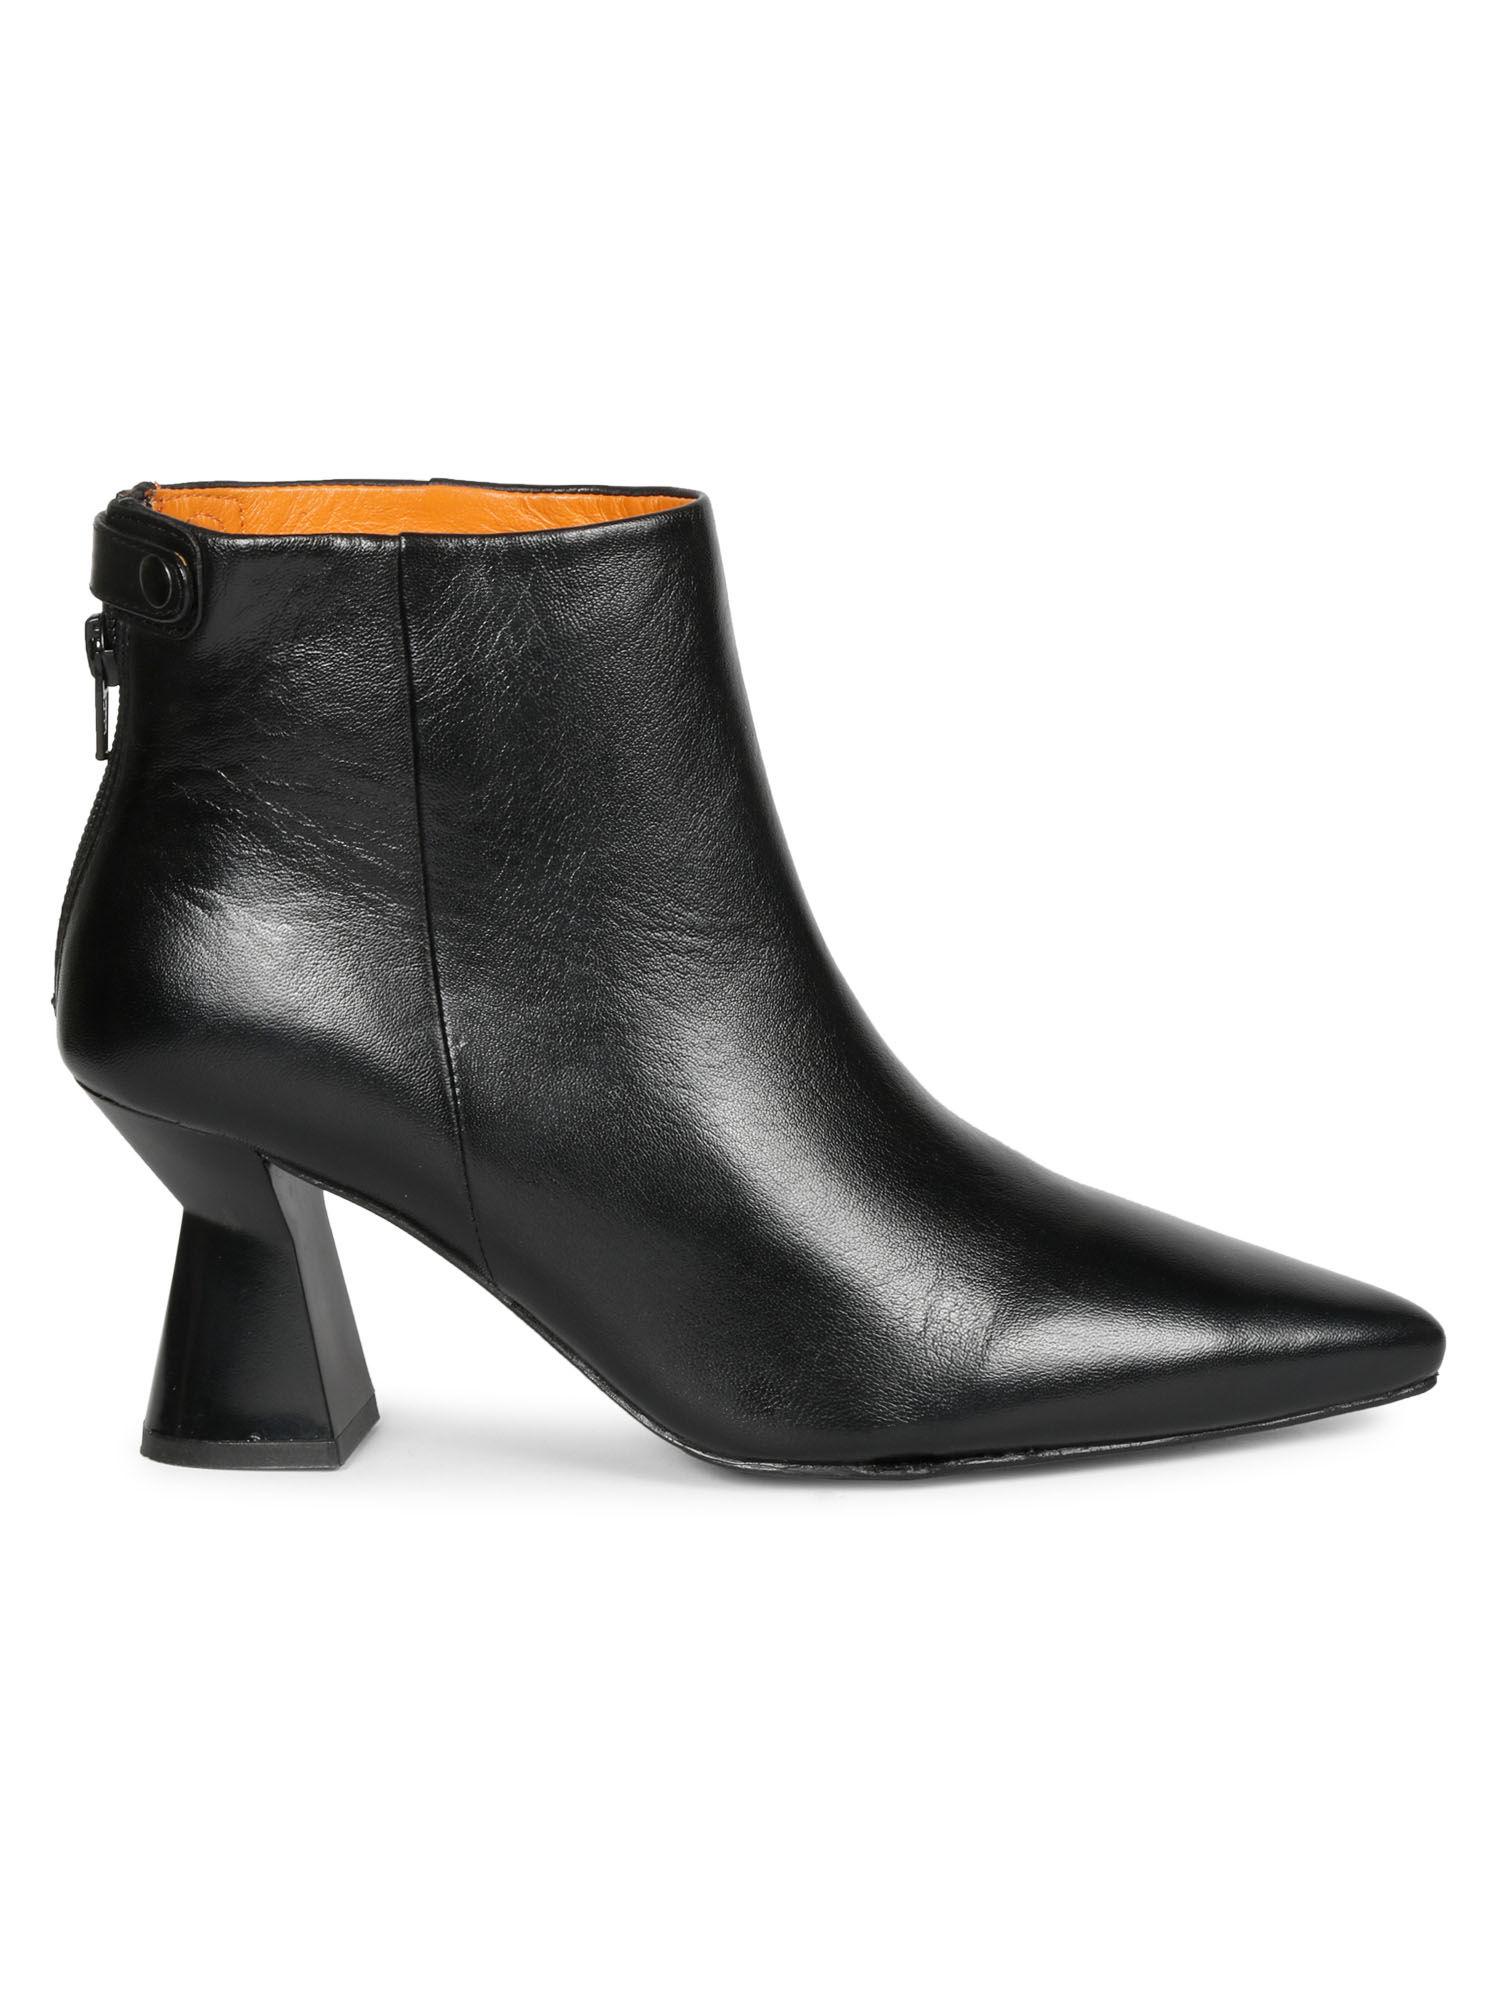 melanie black leather back zip ankle boots